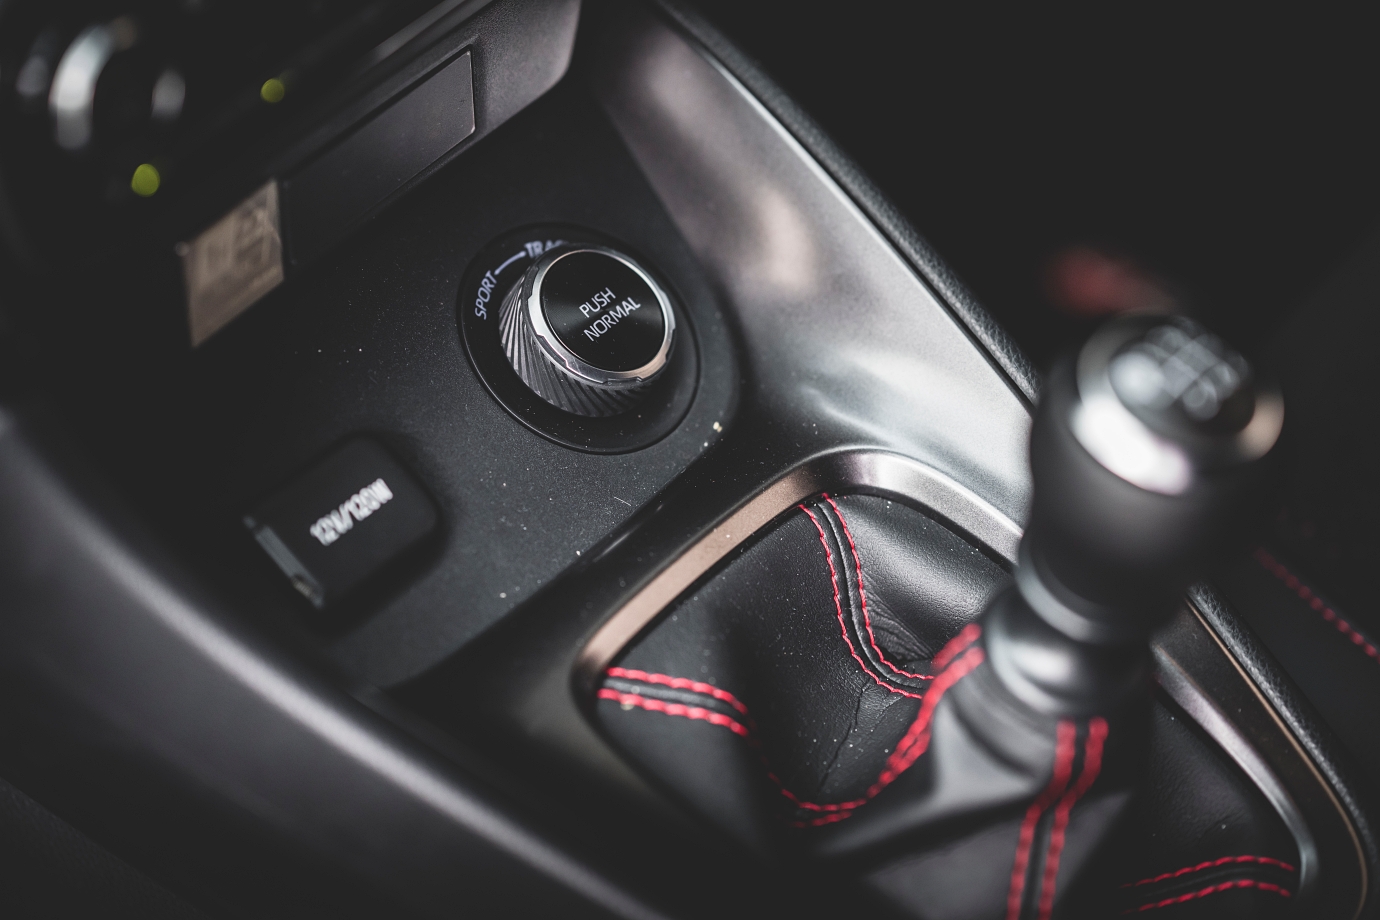 rotary knob toggles between Normal, Sport and Track drive modes